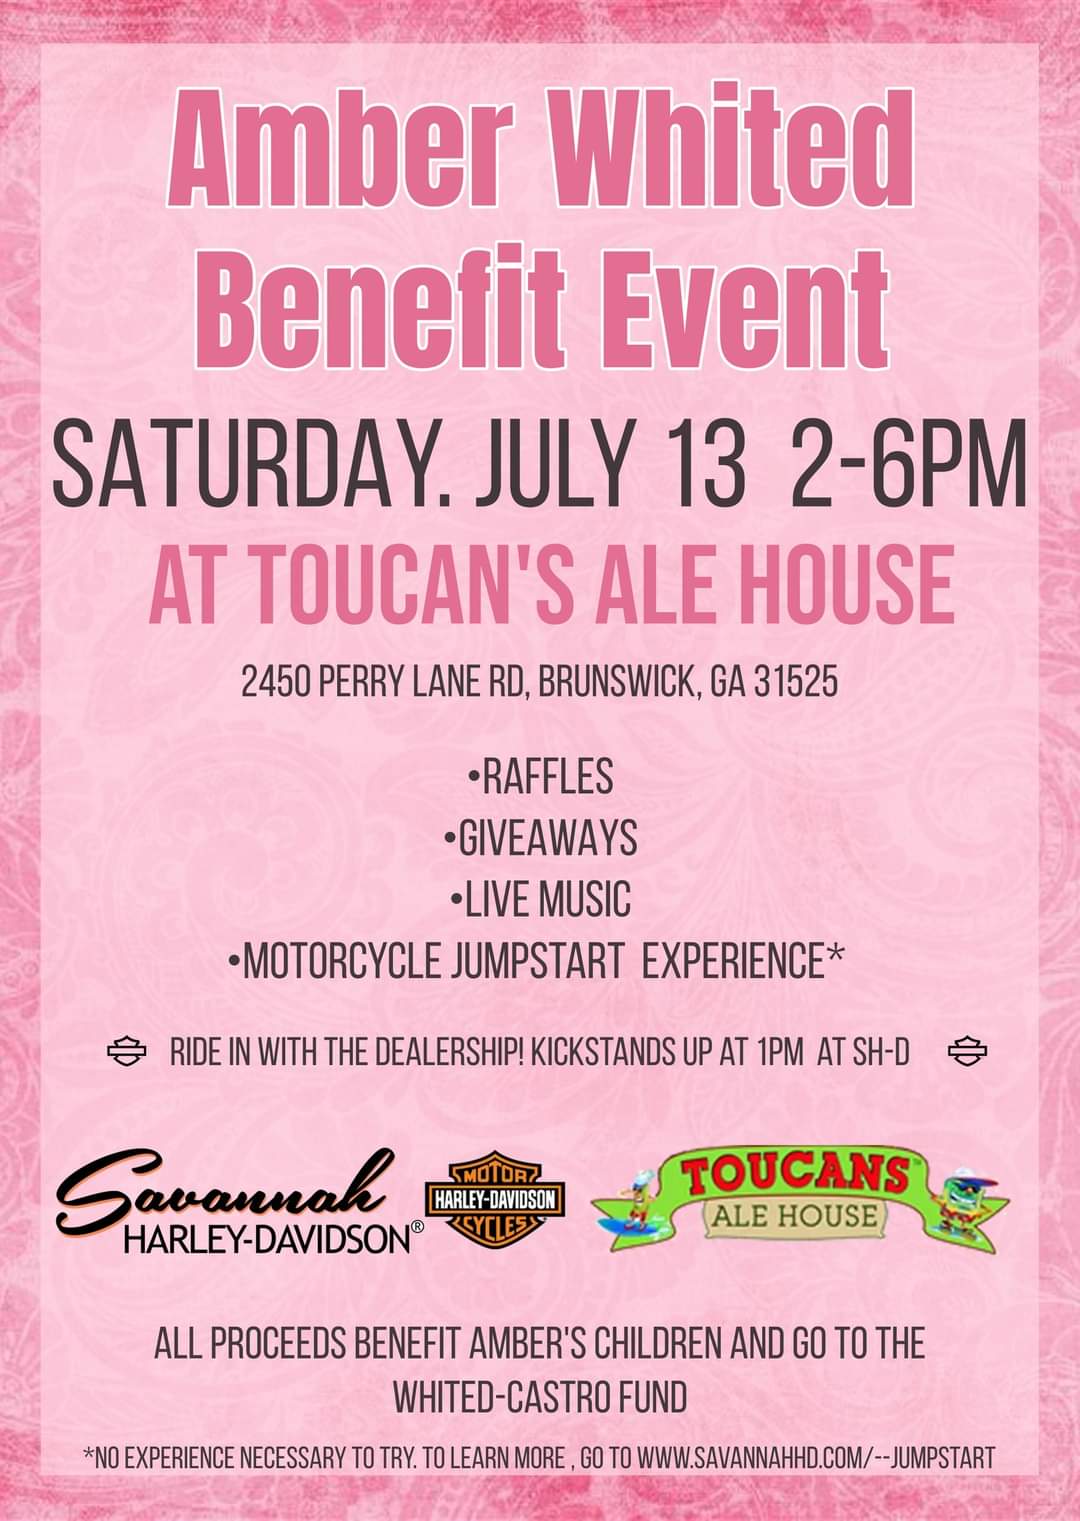 Amber Whited Benefit Event @ Toucan's Ale House | Brunswick | Georgia | United States